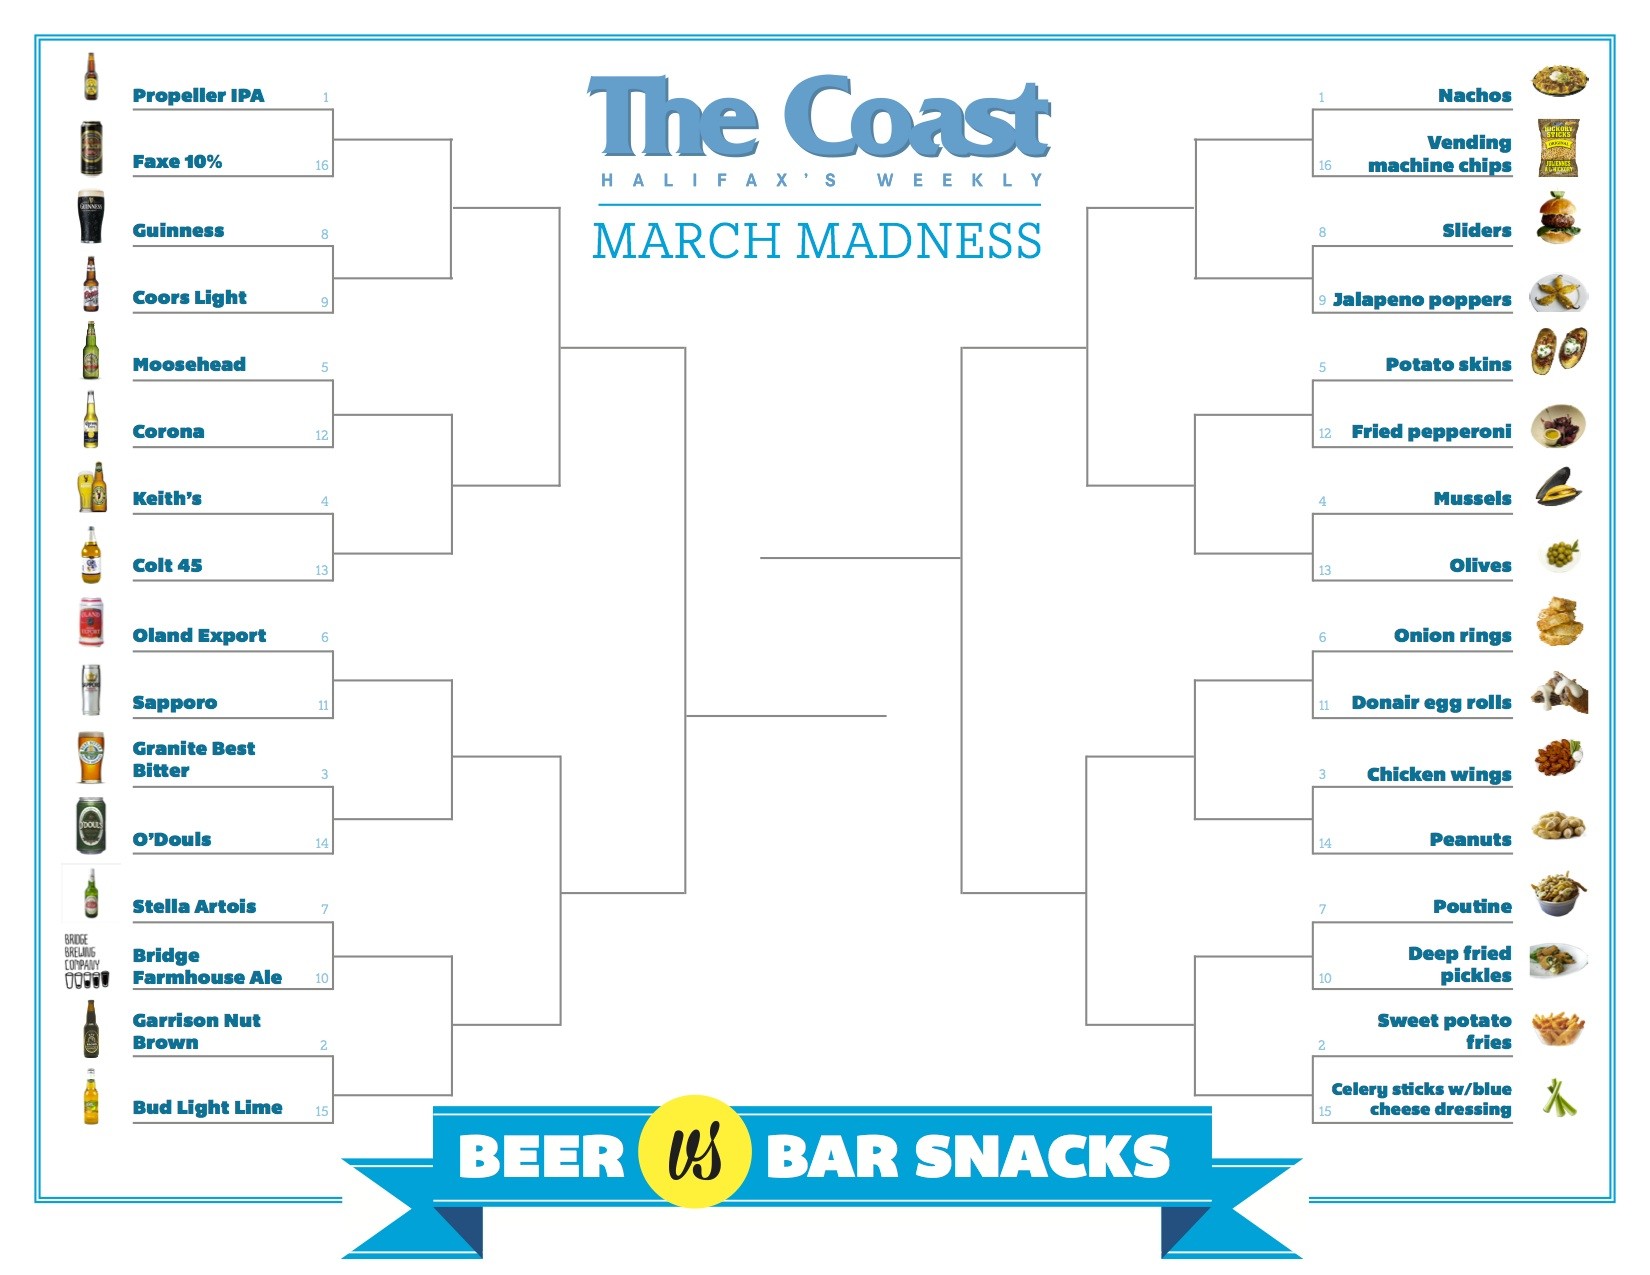 March Madness: Beer vs Bar snacks